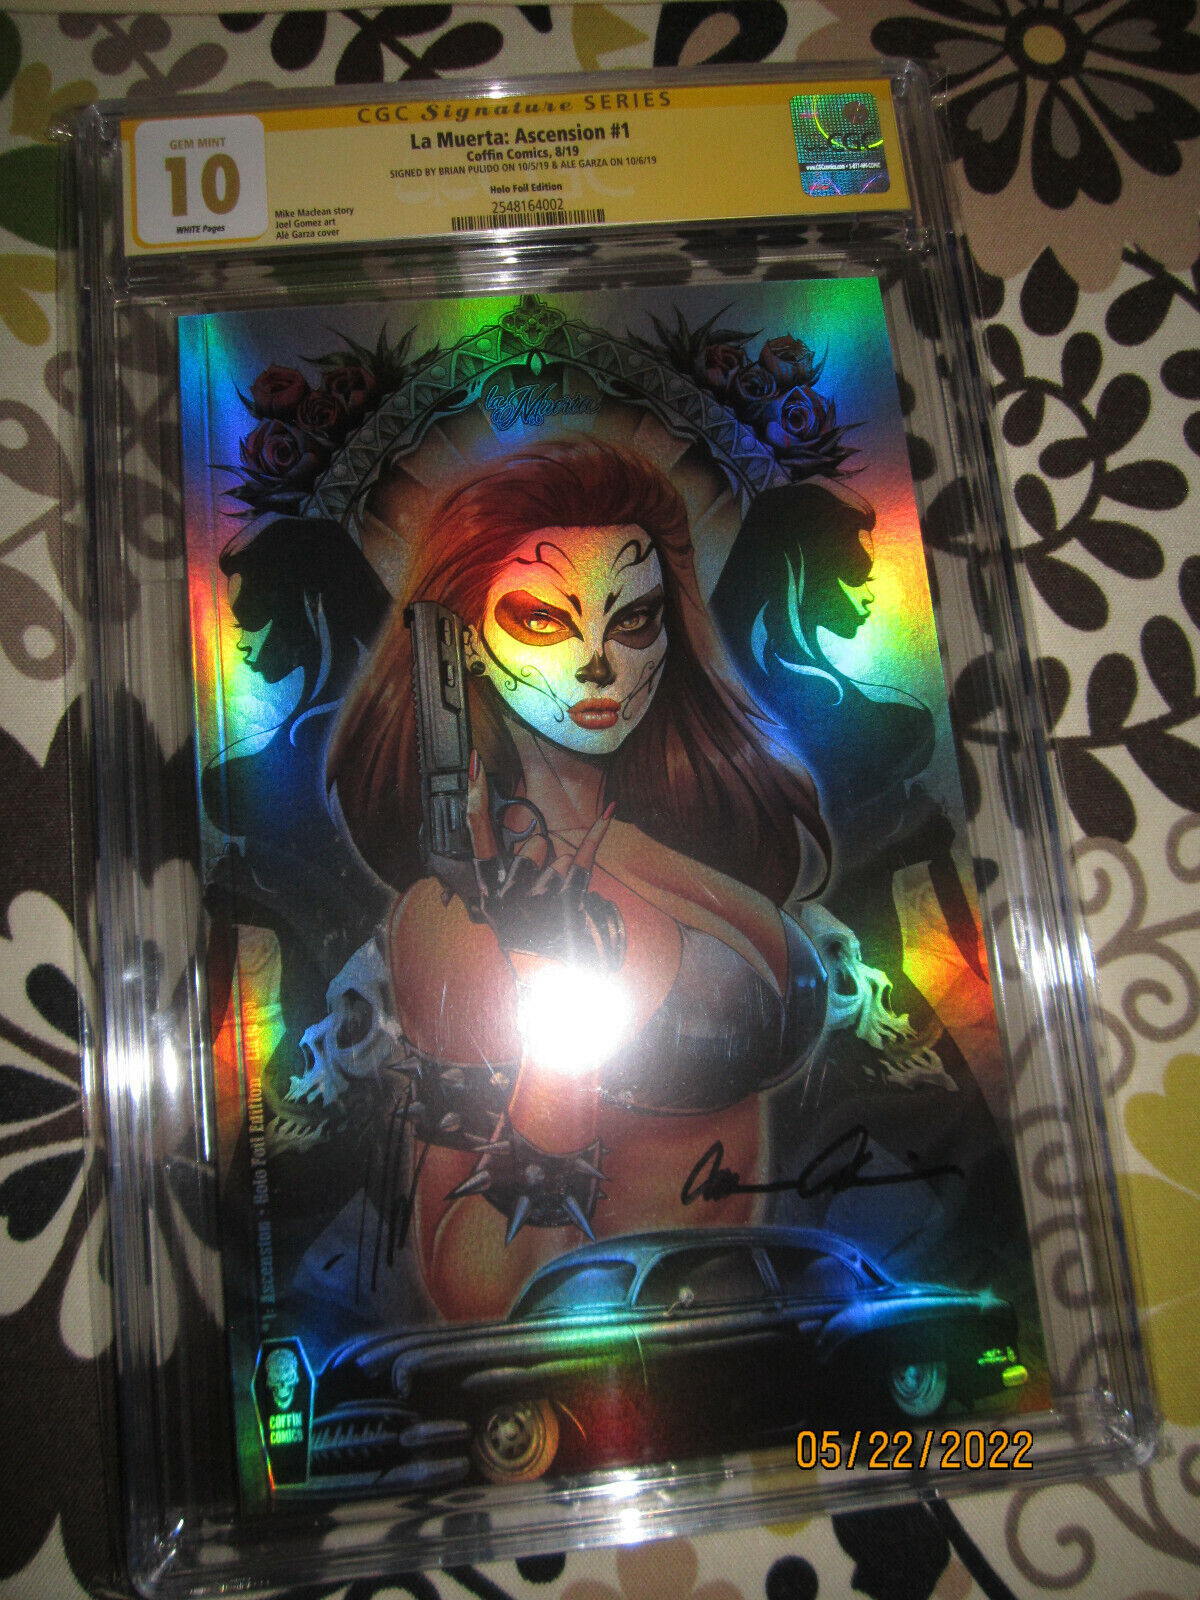 CGC 10.0 SS 10 LA MUERTA 1 ASCENSION SIGNED ALE GARZA HOLO FOIL UP FROM 9.8 9.9